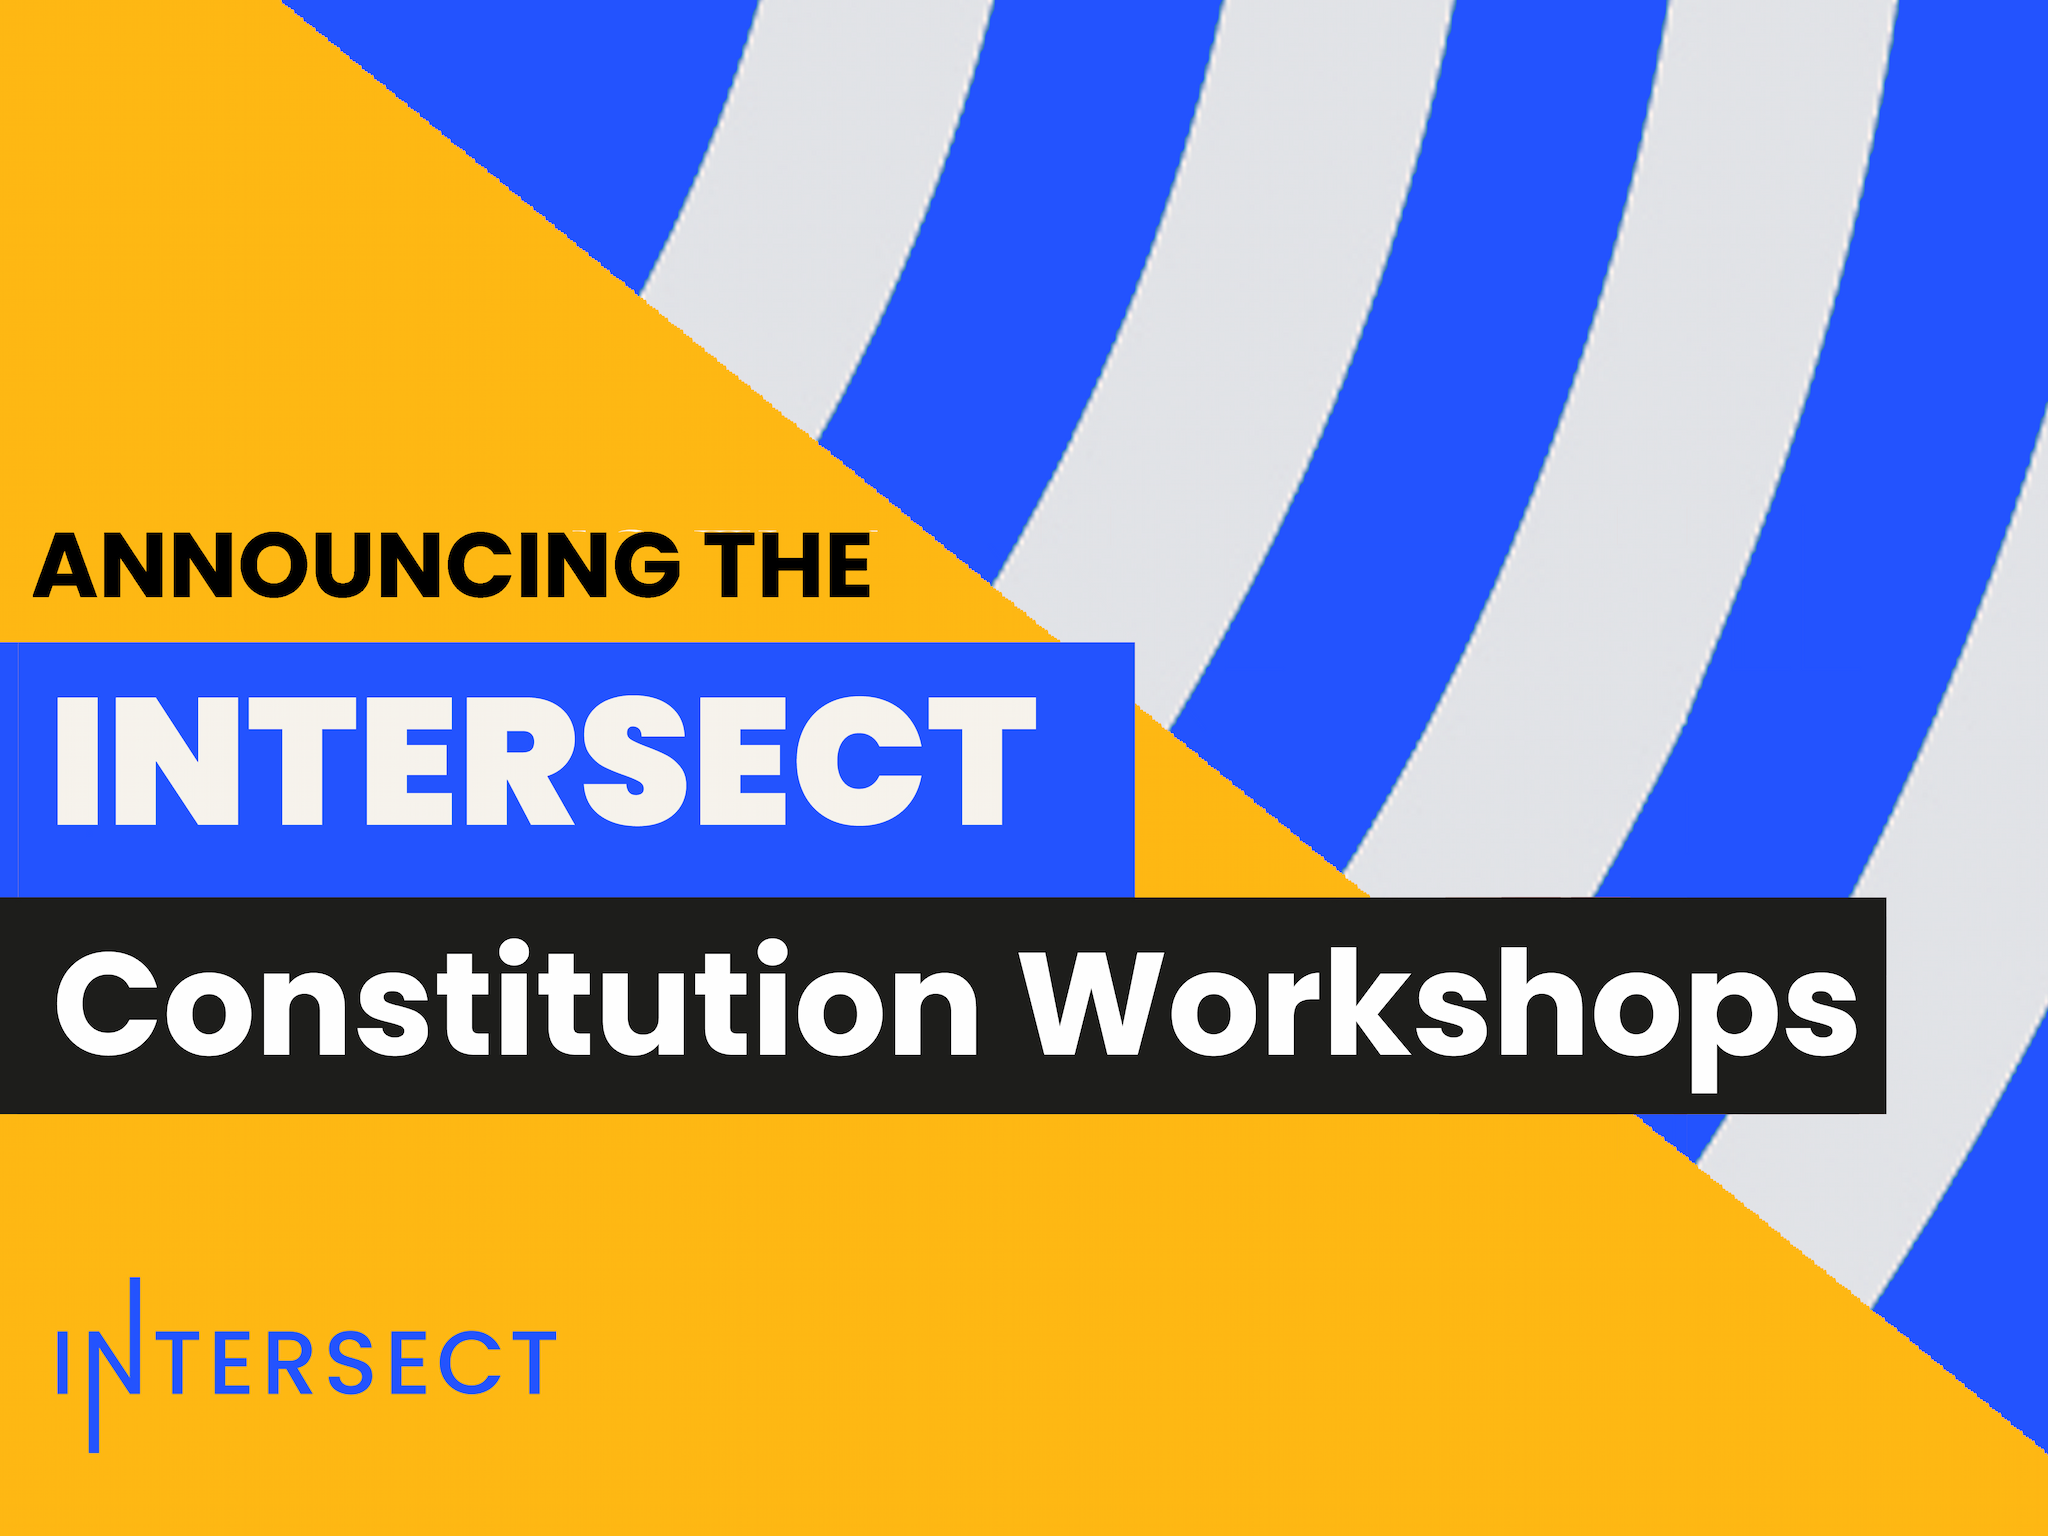 Have your say - kicking off global workshops to draft the final Constitution